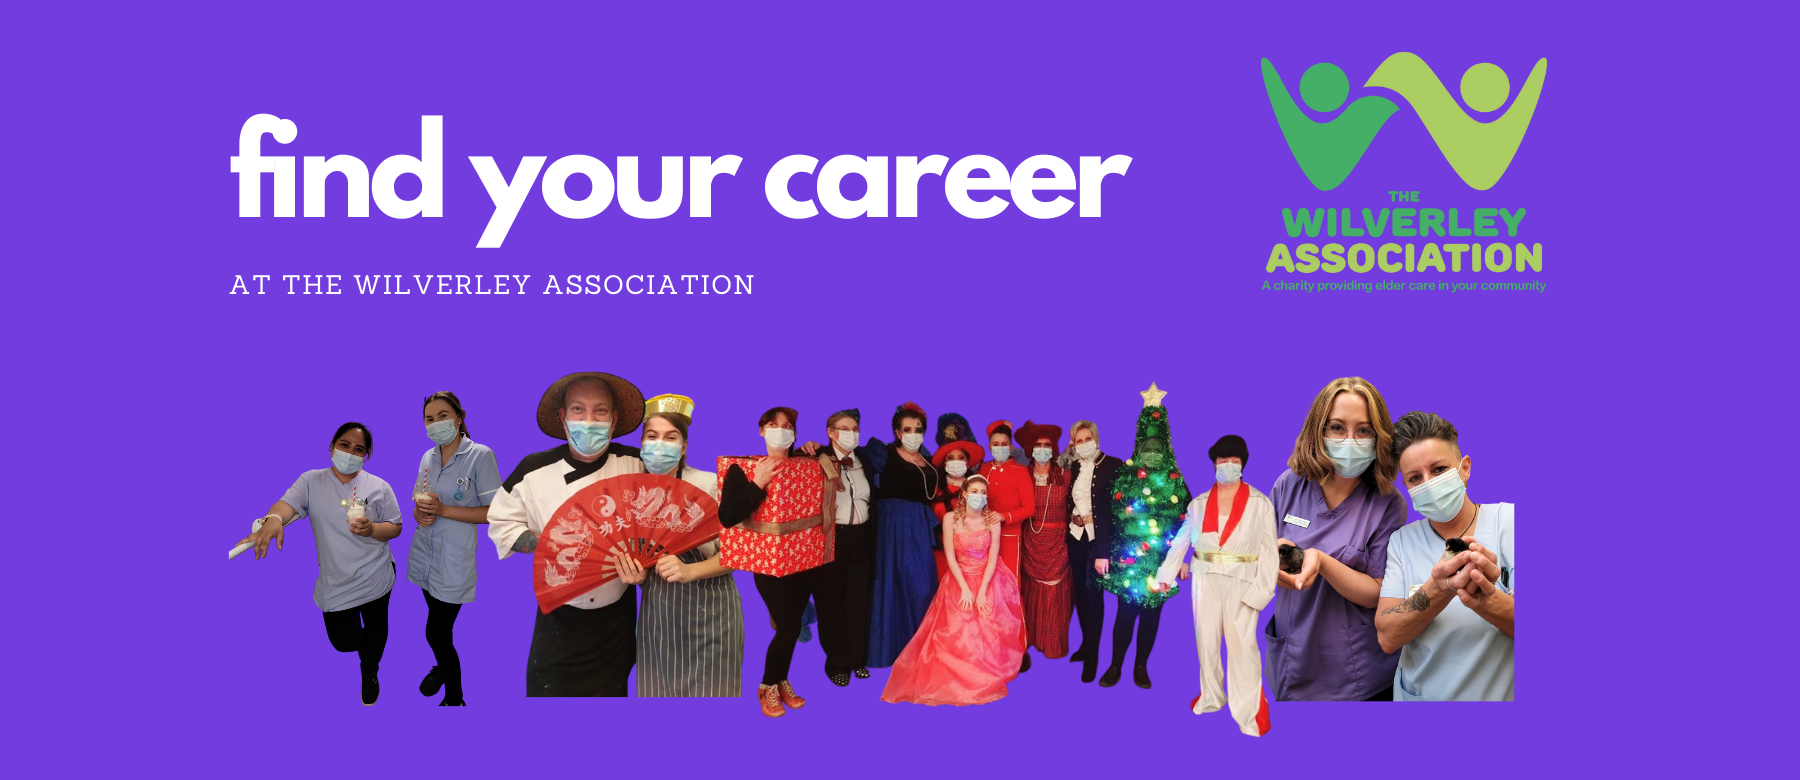 Find Your Career at The Wilverley Association 